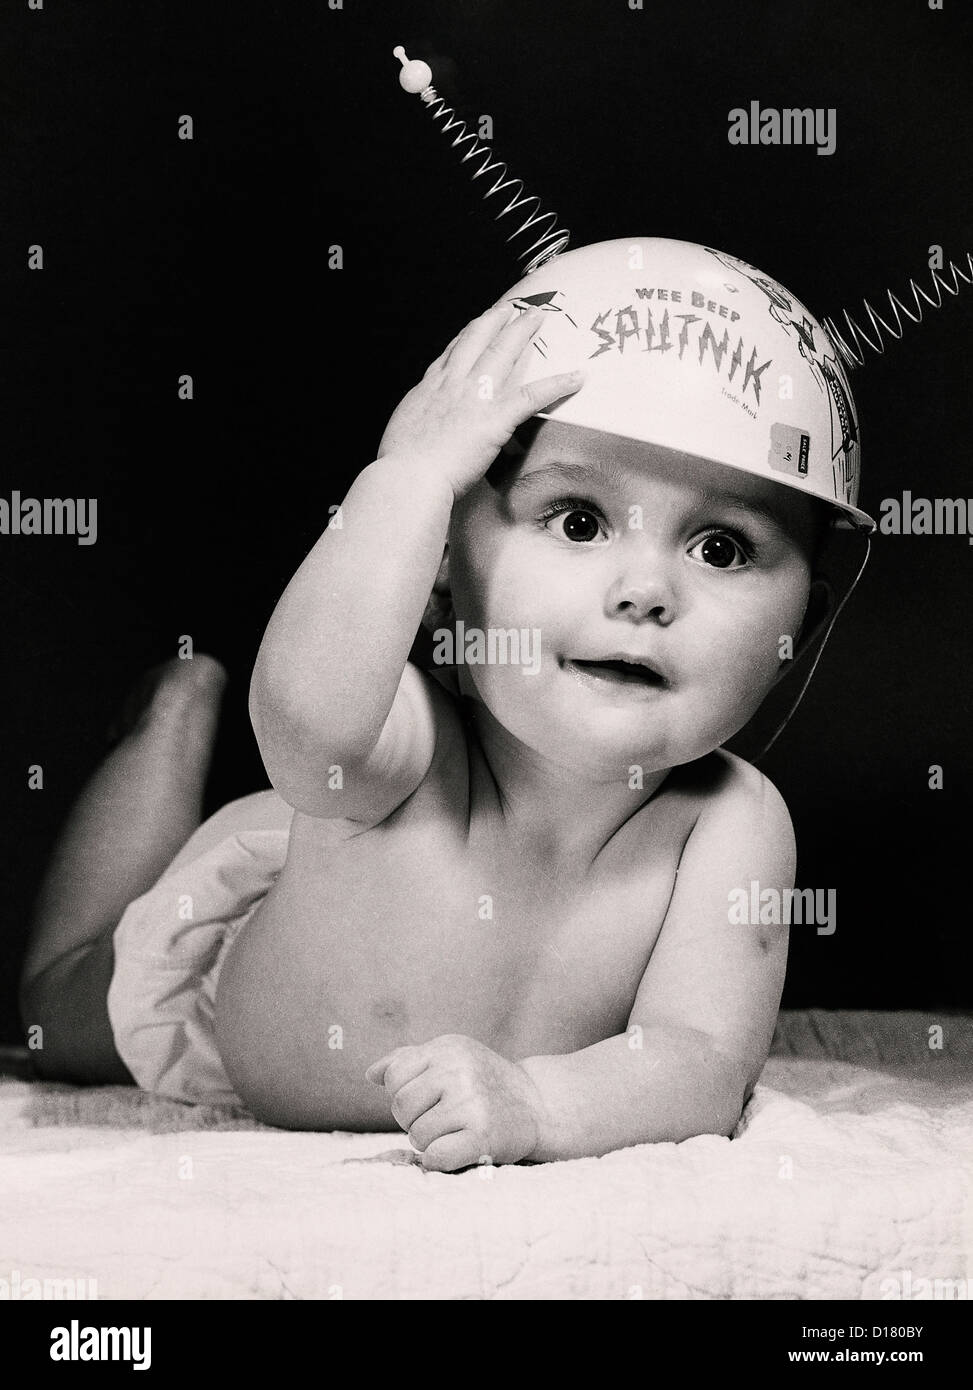 Baby with space hat Stock Photo